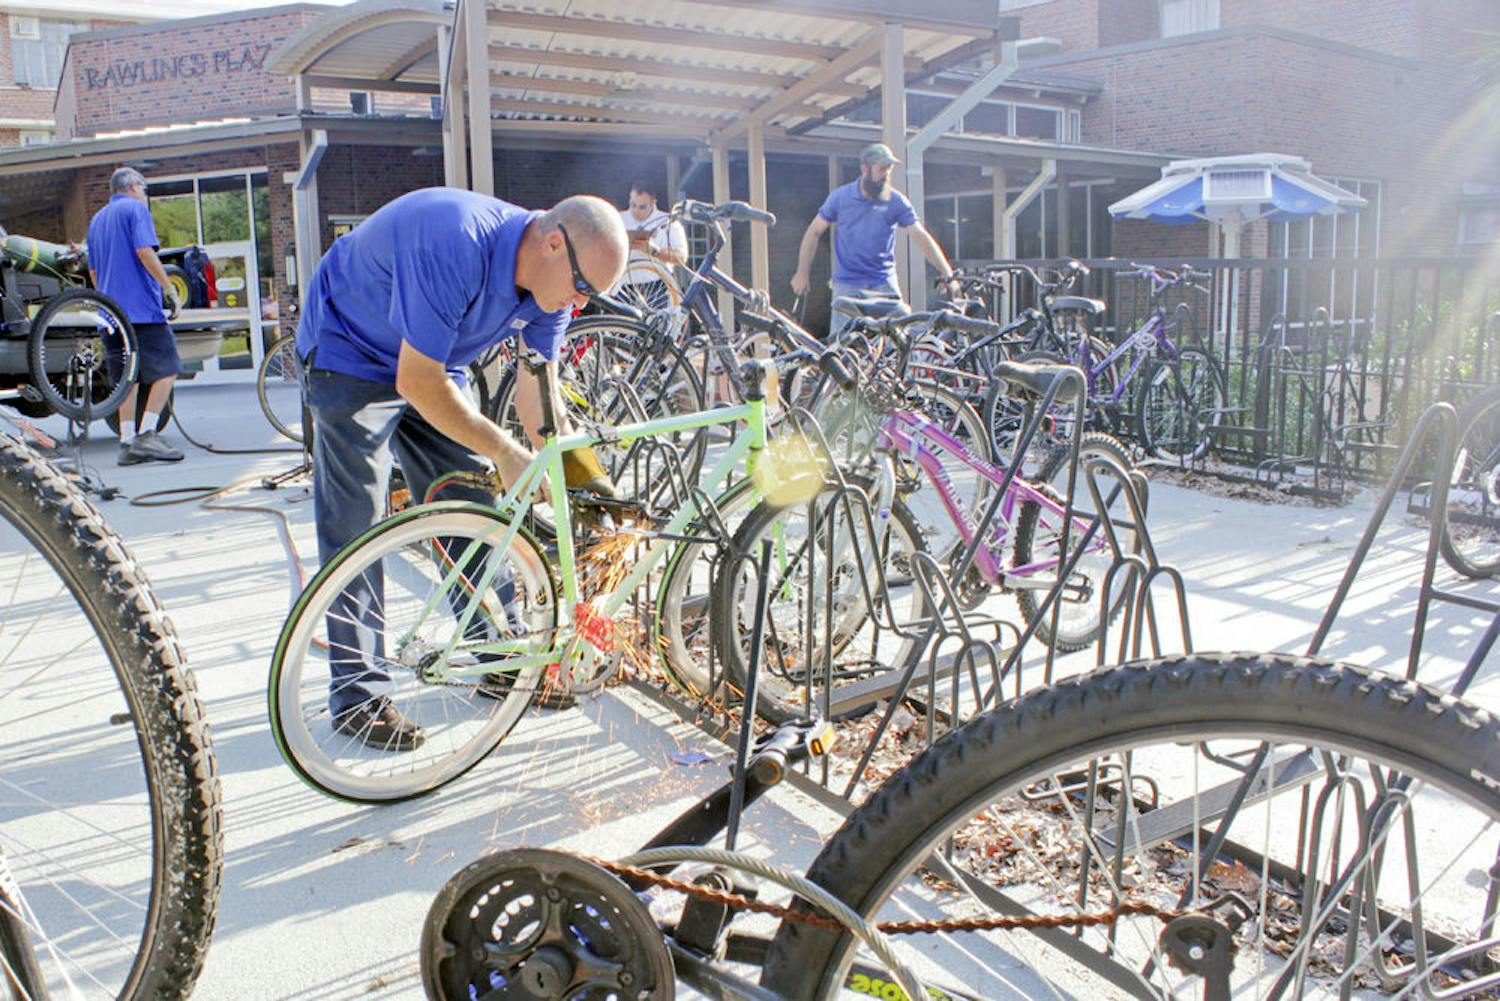 A UF employee removes a lock from an abandoned bicycle using a blowtorch outside Rawlings Hall.